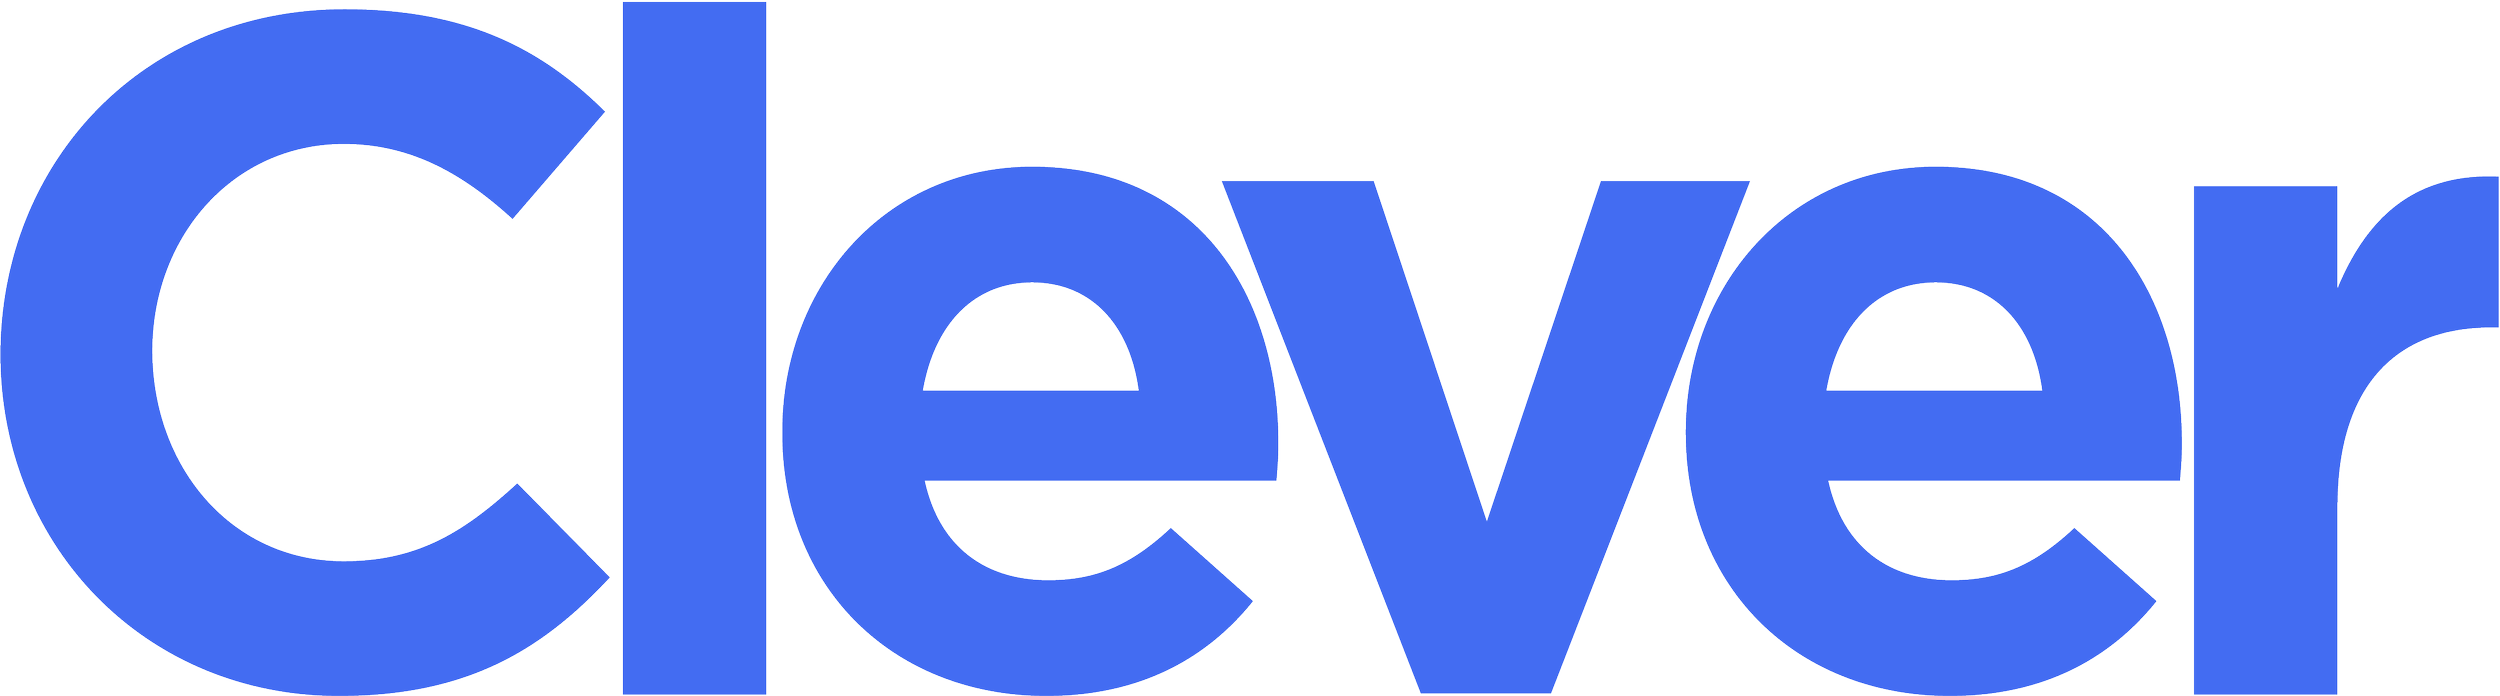 Clever_blue_logo.png